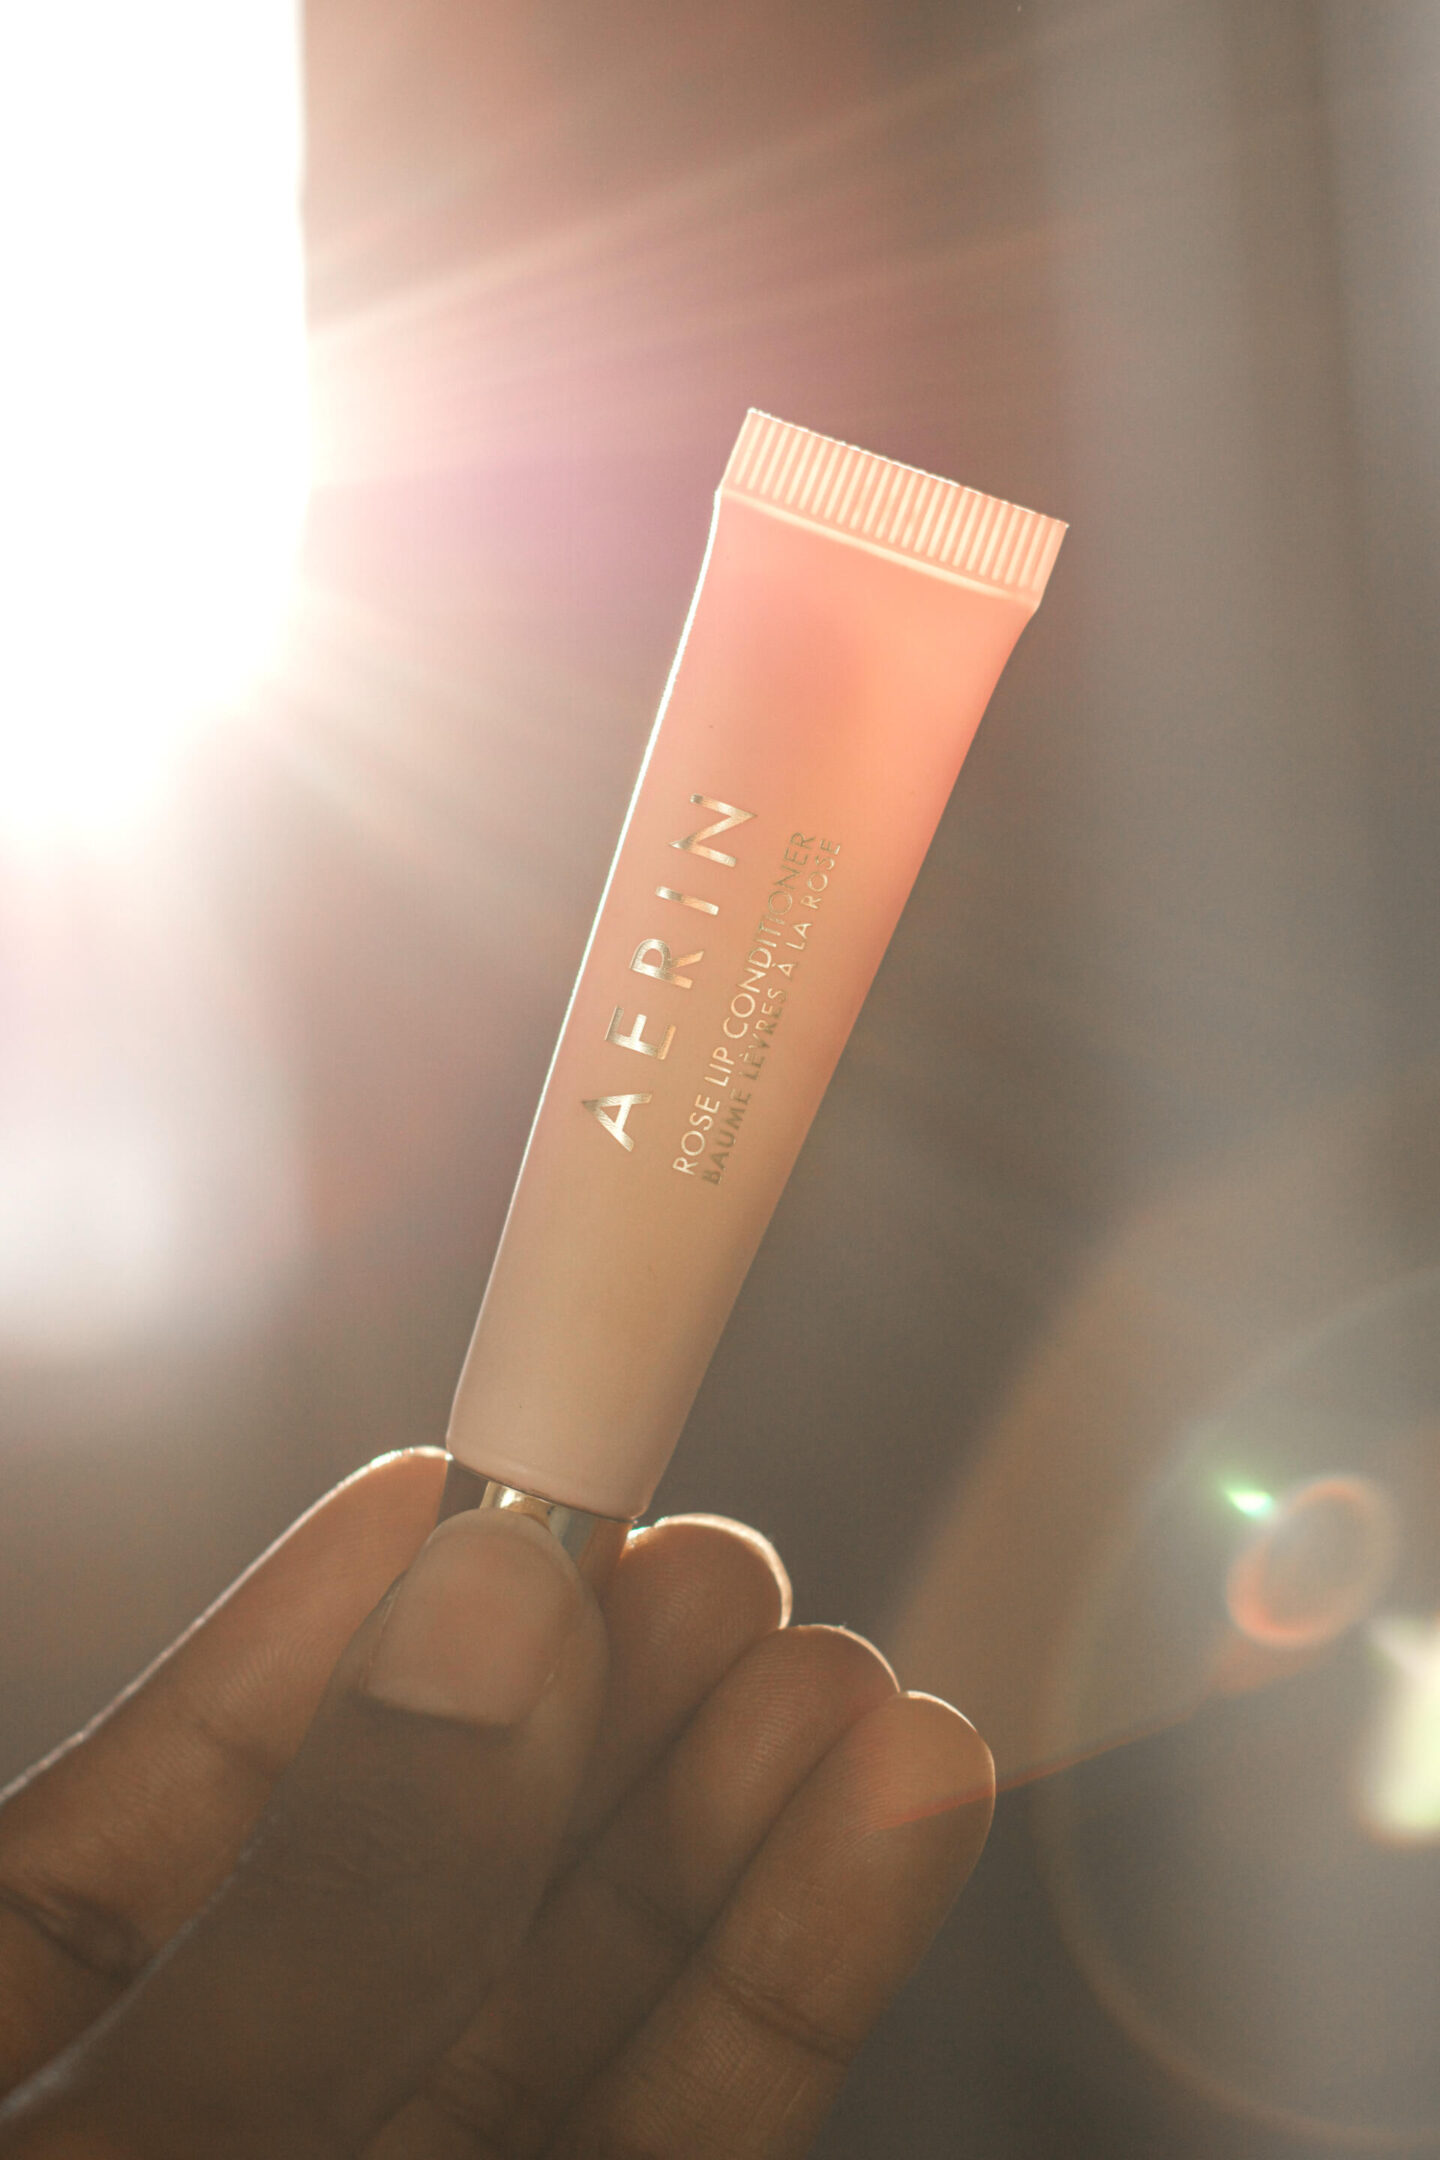 Aerin Rose Lip Conditioner held in front of the sun